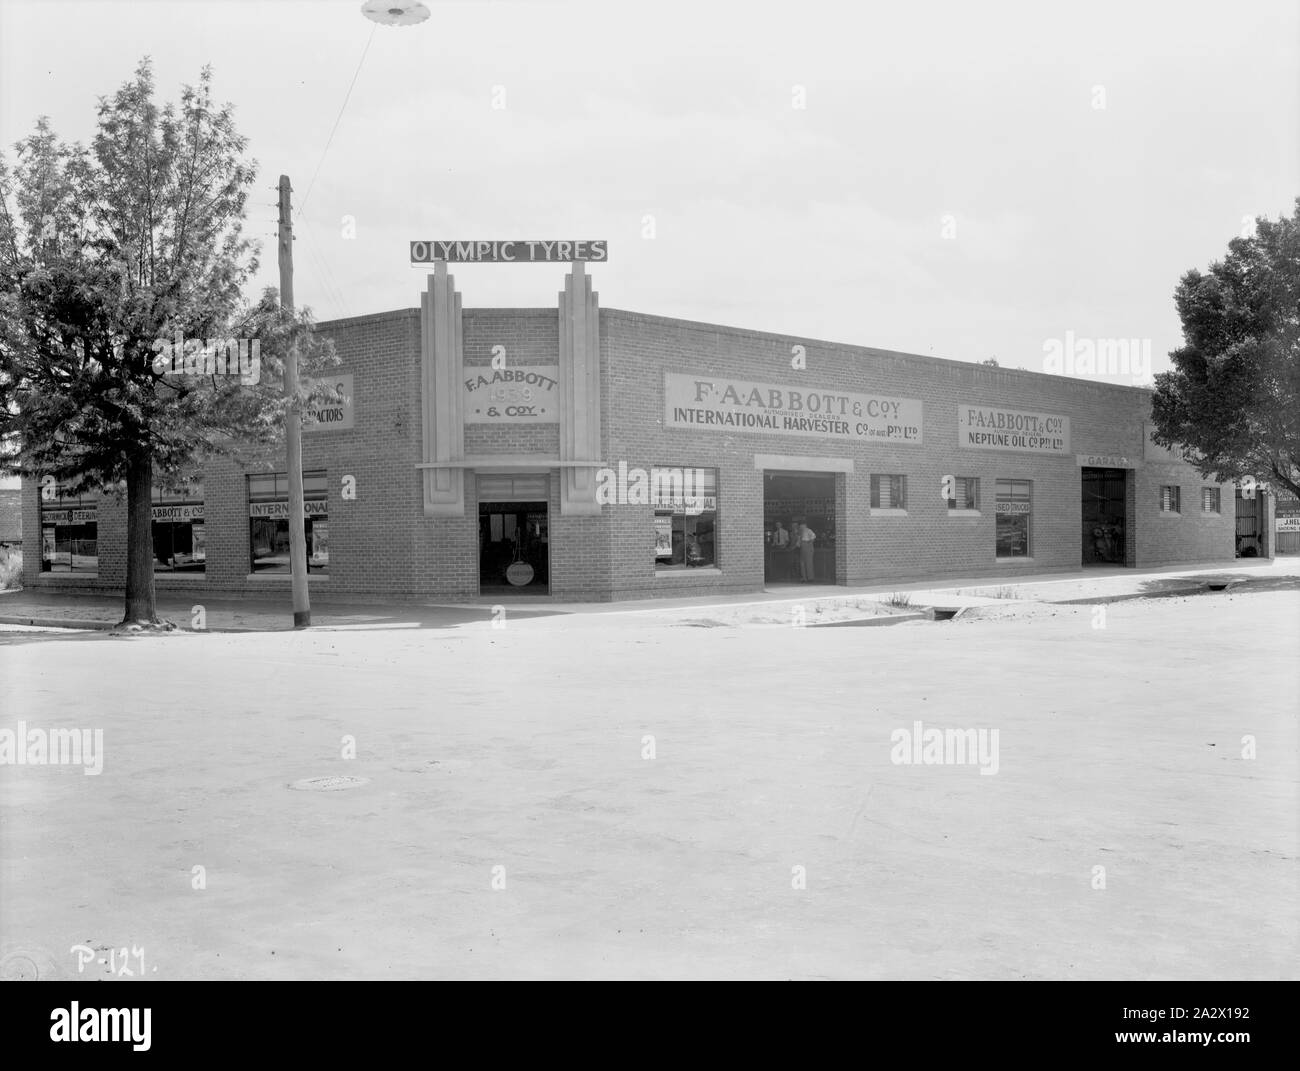 Negative - International Harvester, F.A. Abbott & Co. Store, Albury, 1940, Part of a large collection of glass plate and film negatives, transparencies, photo albums, product catalogues, videos, motion picture films, company journals, advertisements and newspaper cuttings relating to the operations of the International Harvester Company and its subsidiaries in Australia. The International Harvester Company of America was formed in 1902 by the merger of five leading Stock Photo